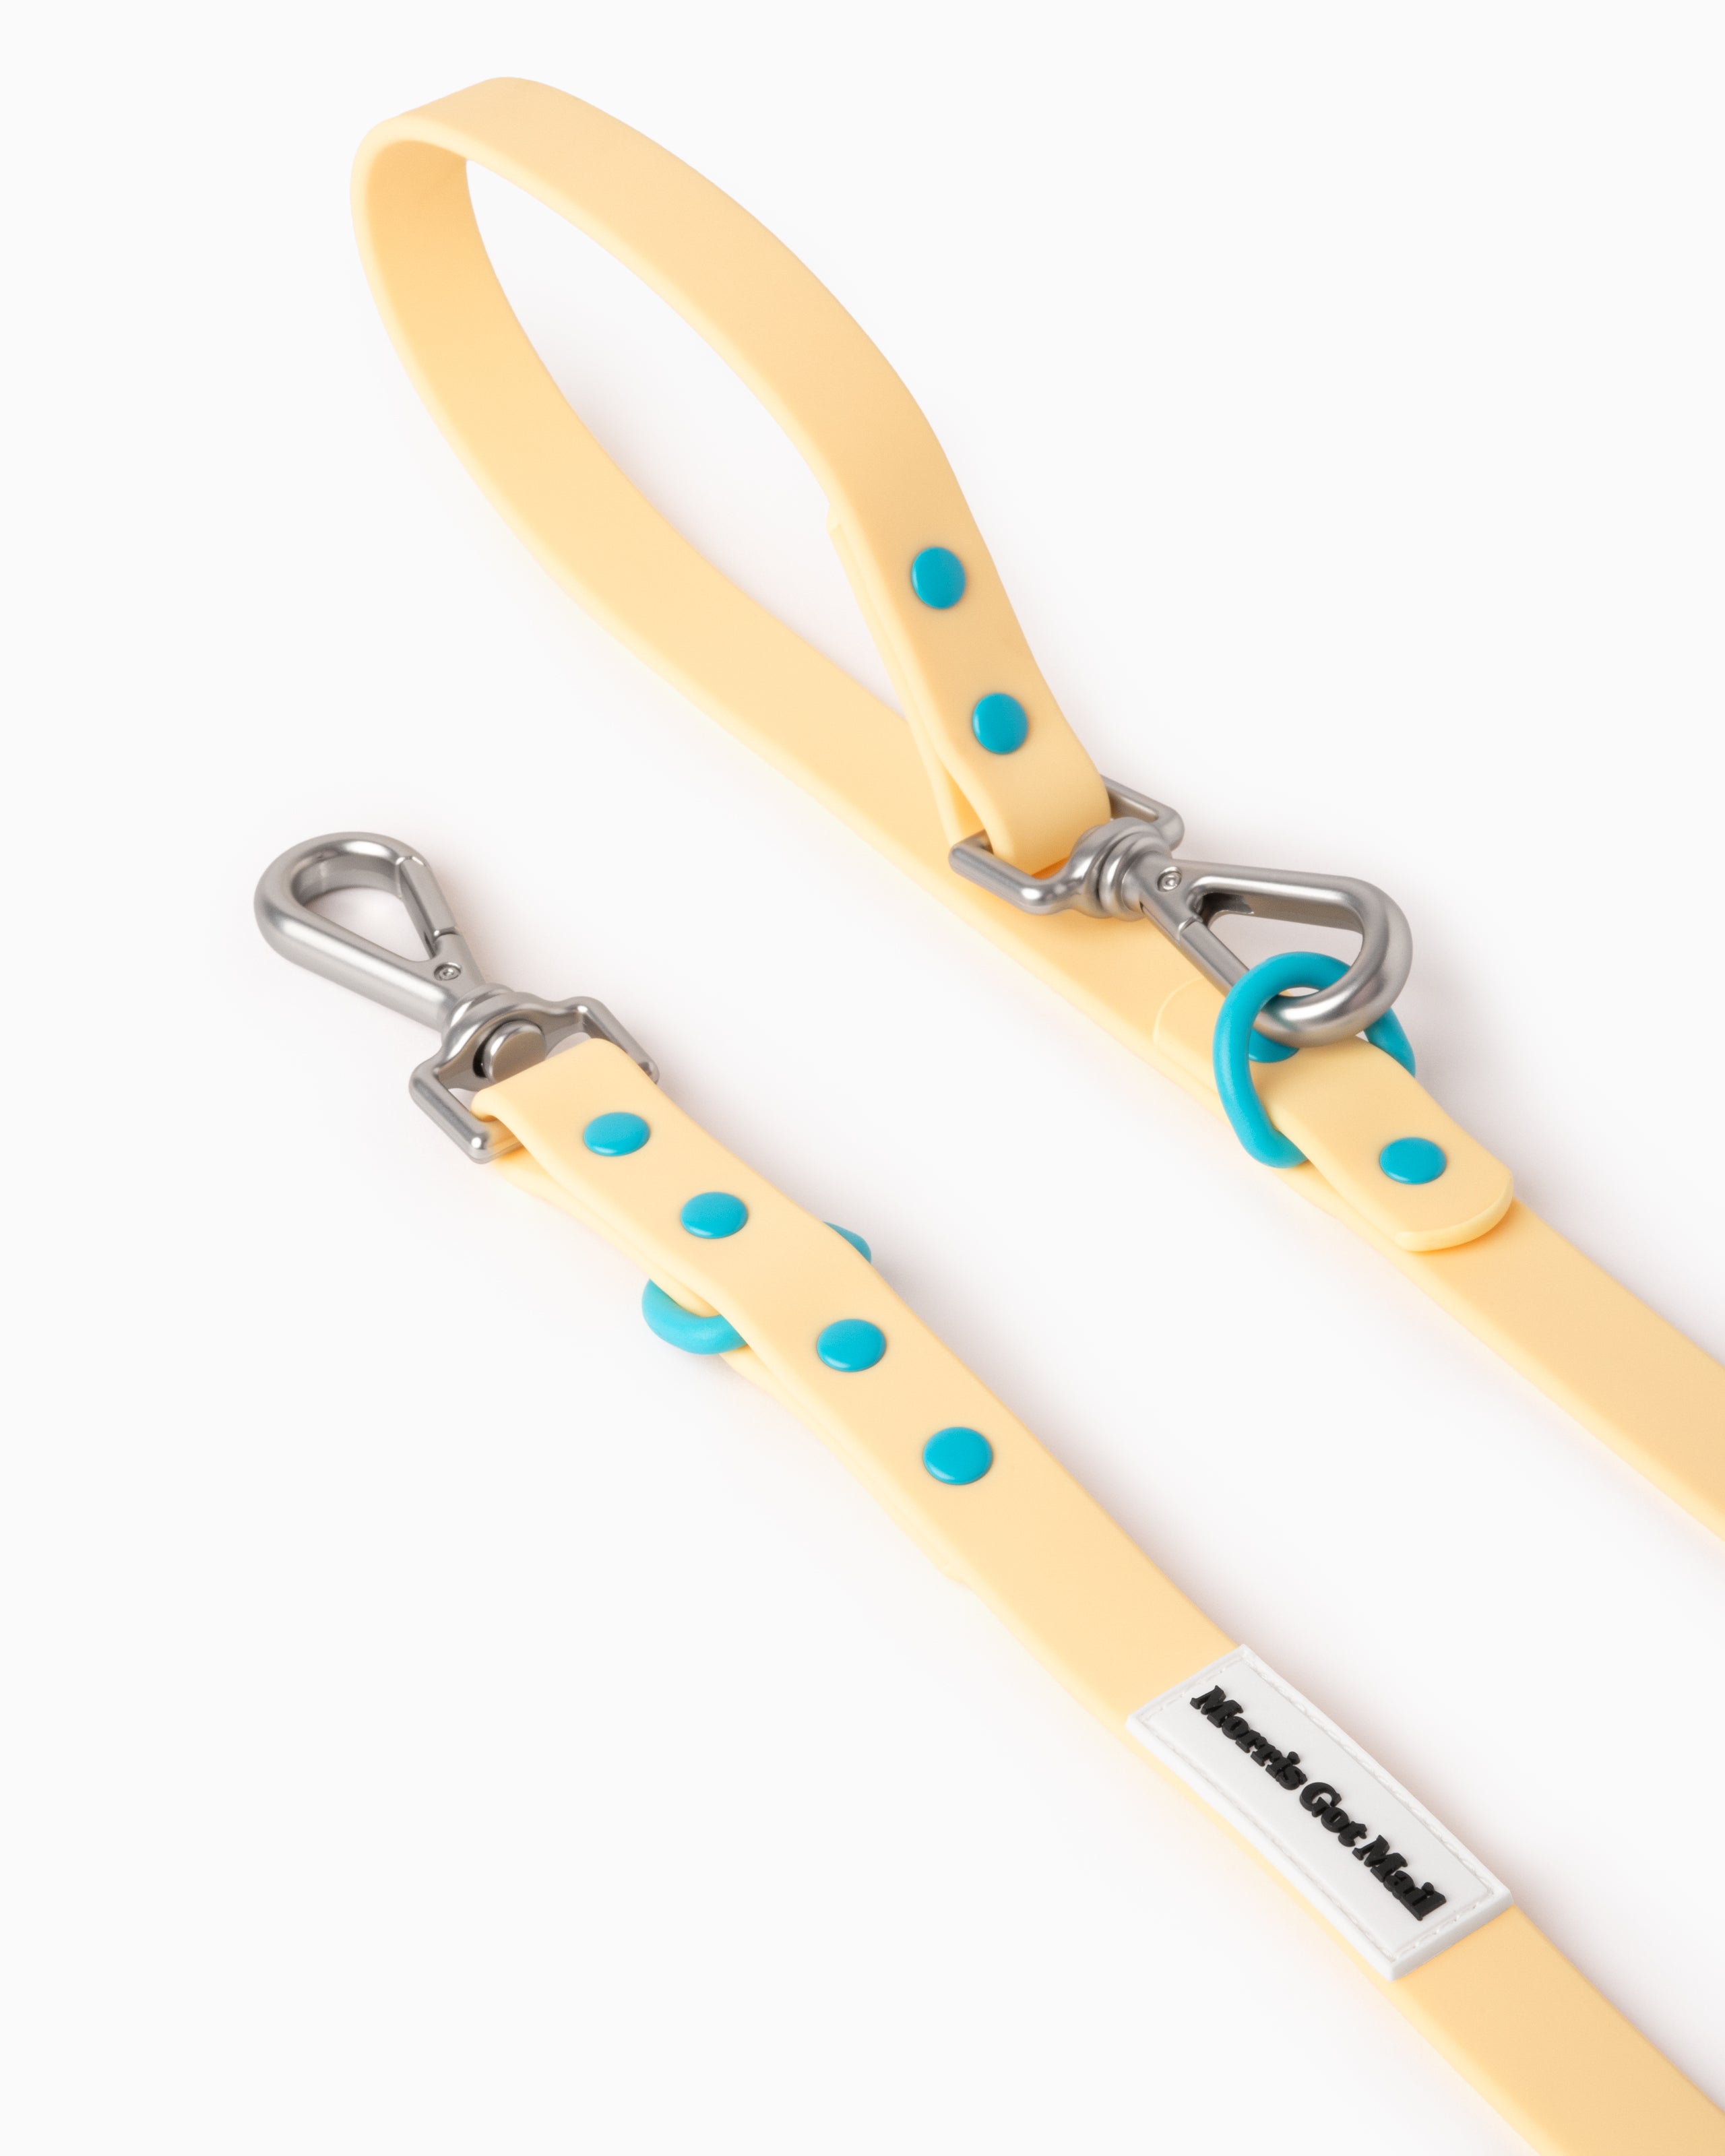 Buttery yellow waterproof & odor resistant dog leash with a two tone colorblock design, two length options, a handle, carbon coated steel hardware, & zinc alloy attachment hooks.